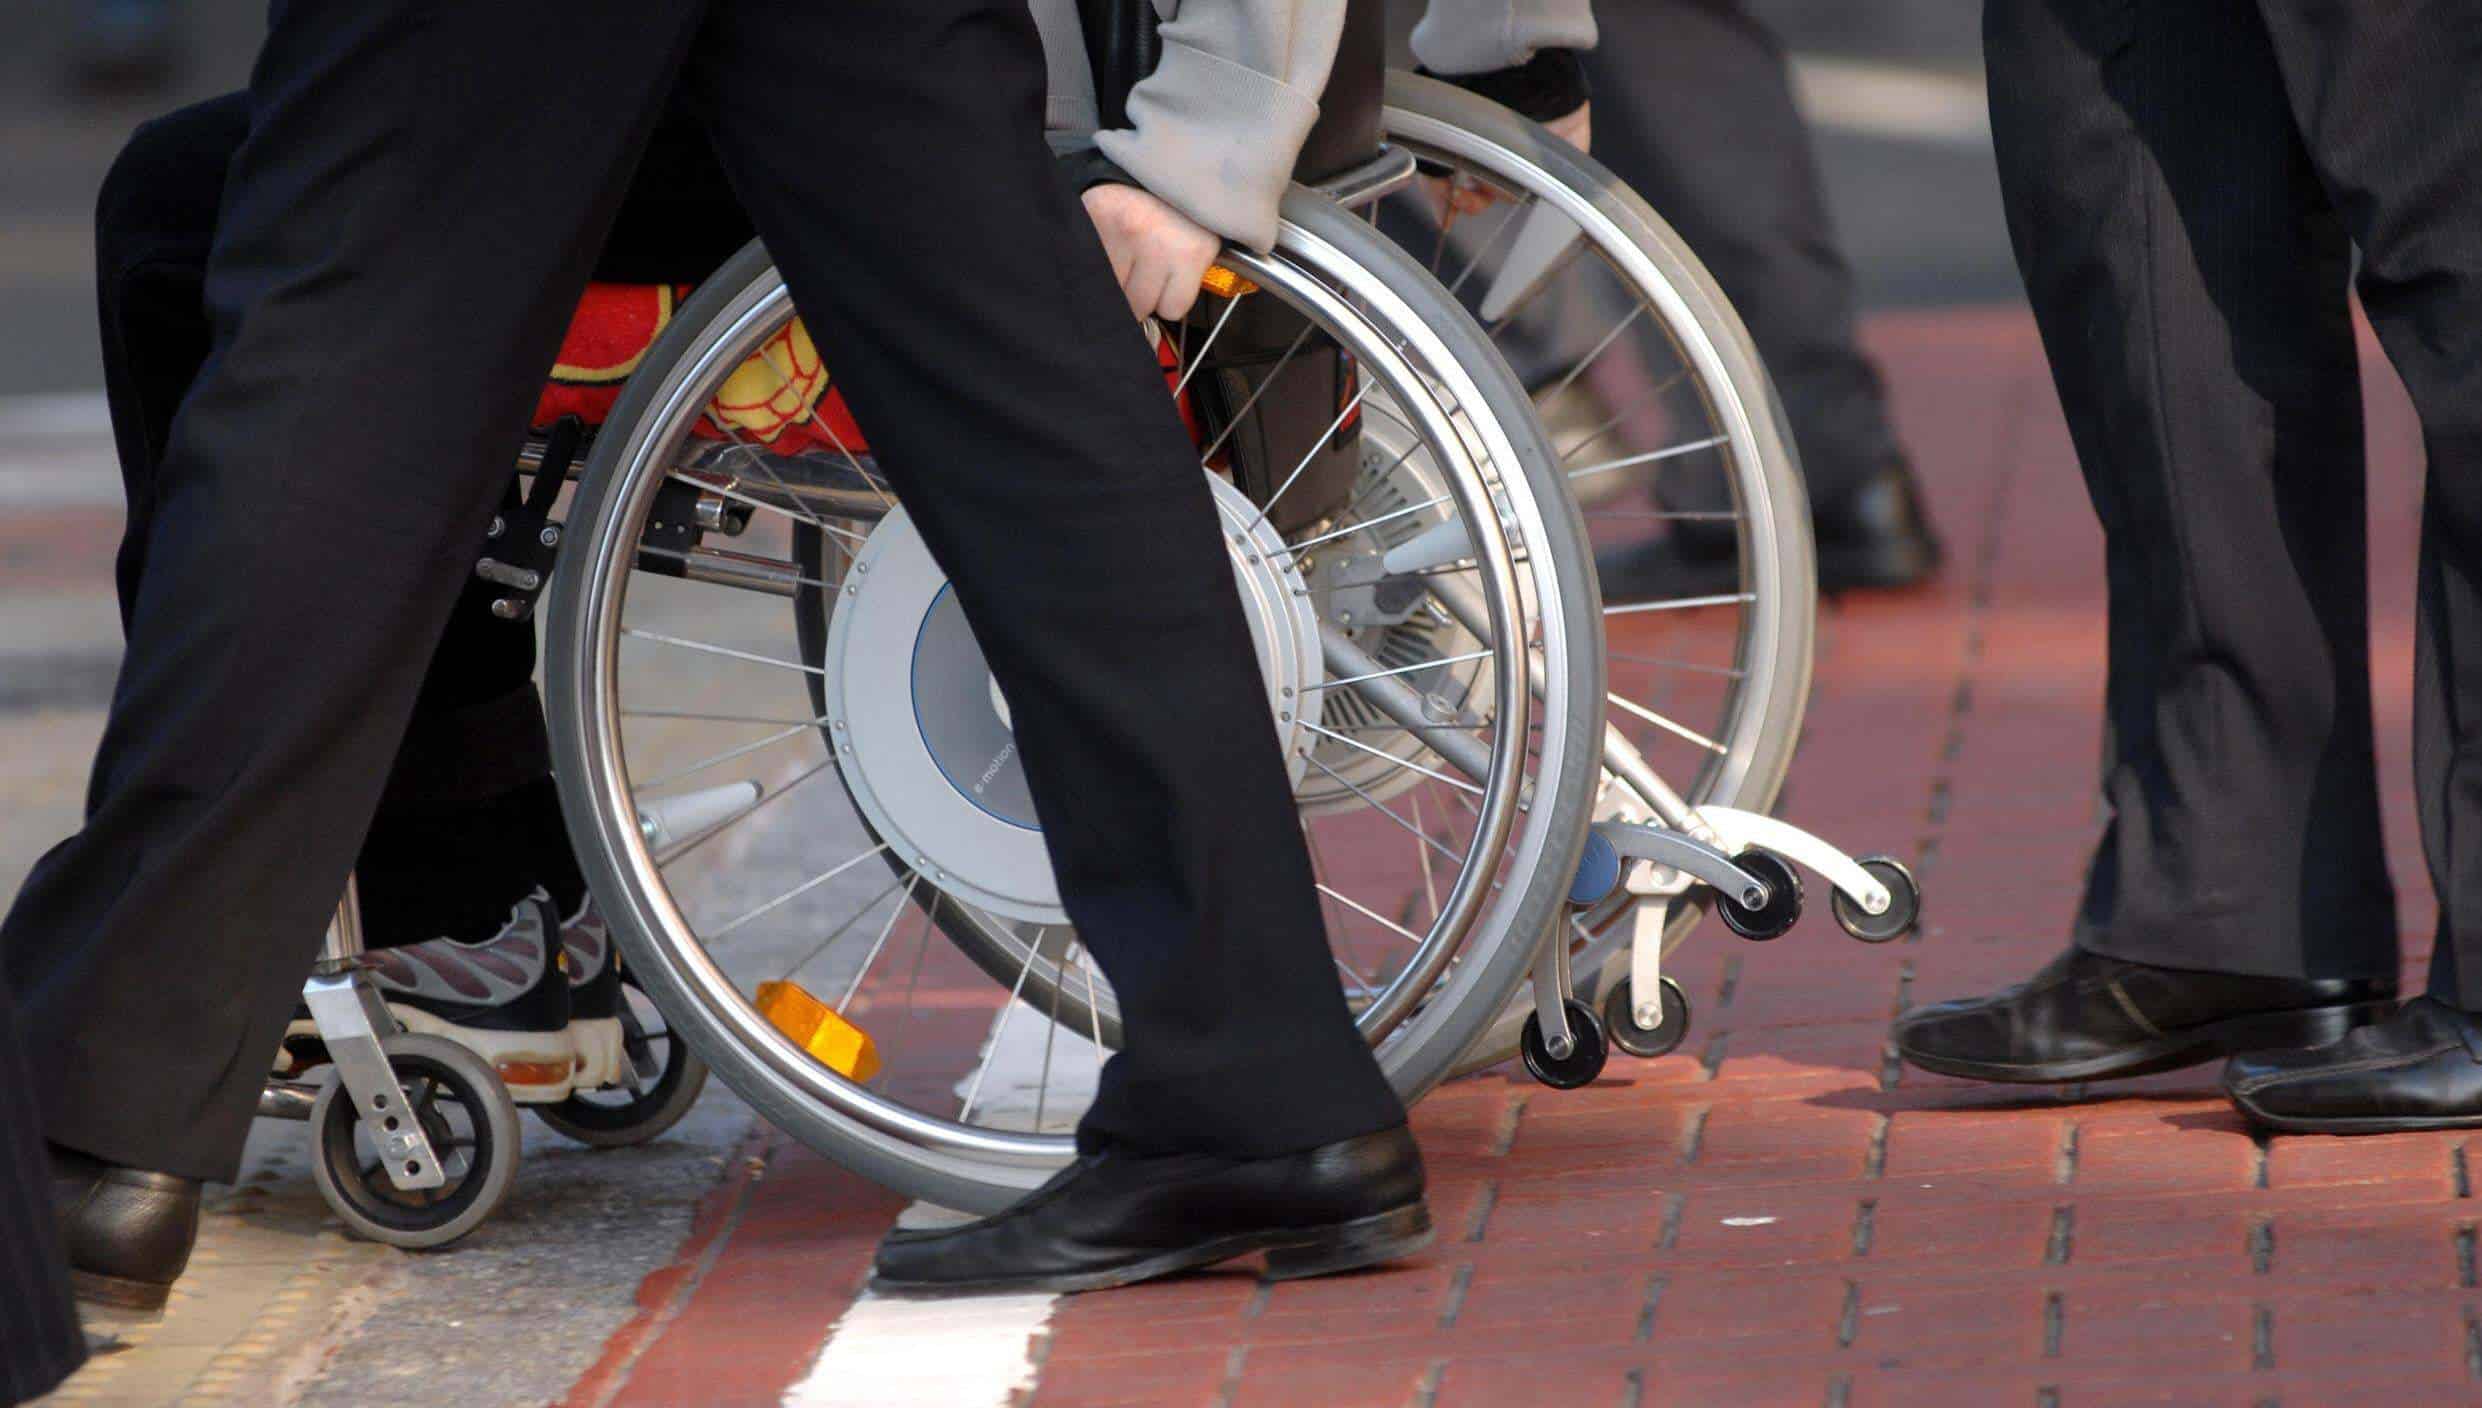 Violent hate crime against the disabled rose by 41% in a year